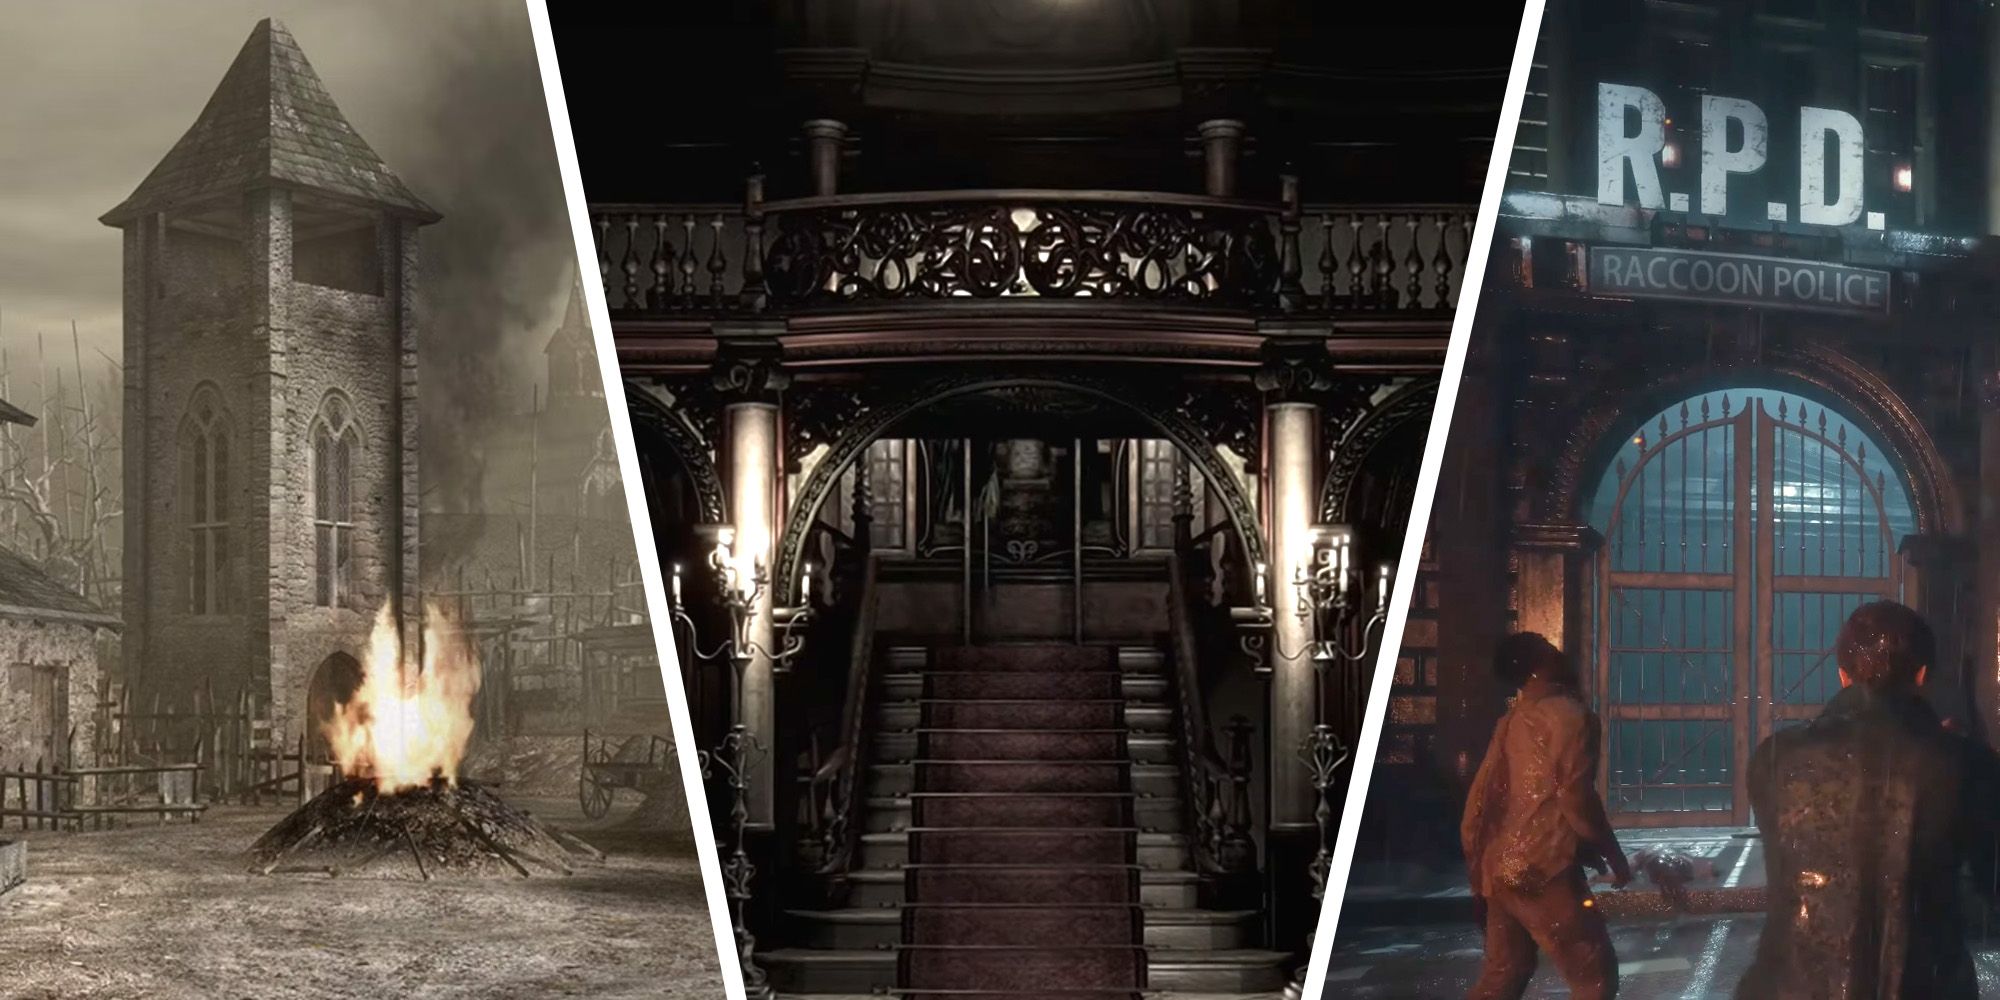 Scariest Locations In The Resident Evil Series - Split image of The Village from Resident Evil 4, Spencer Mansion from Resident Evil, and The Raccoon City Police Department from Resident Evil 2 Remake